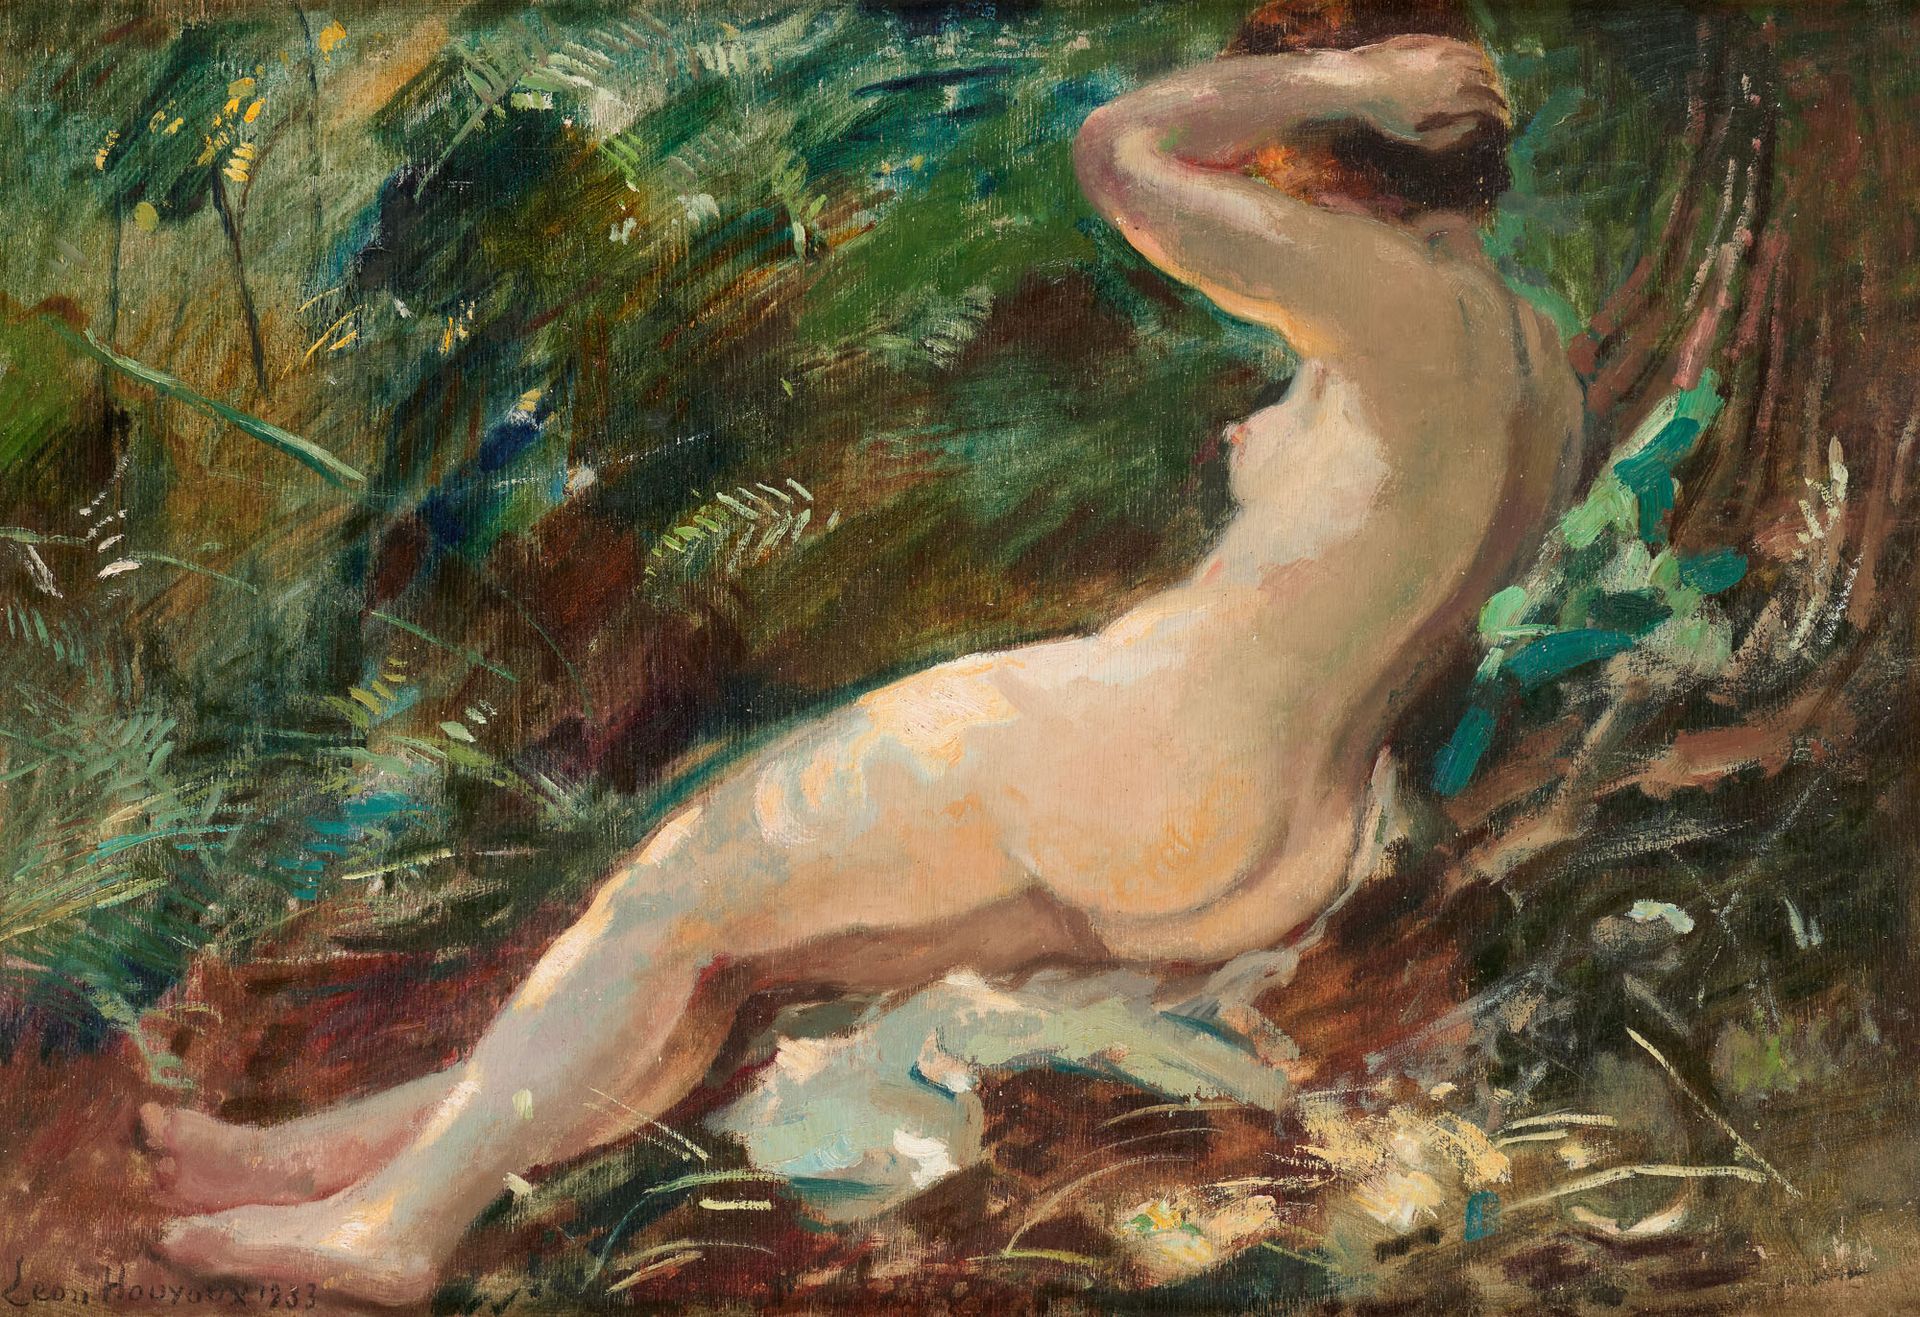 Léon HOUYOUX École belge (1856-1940) Oil on panel: Young naked woman in a wood.
&hellip;